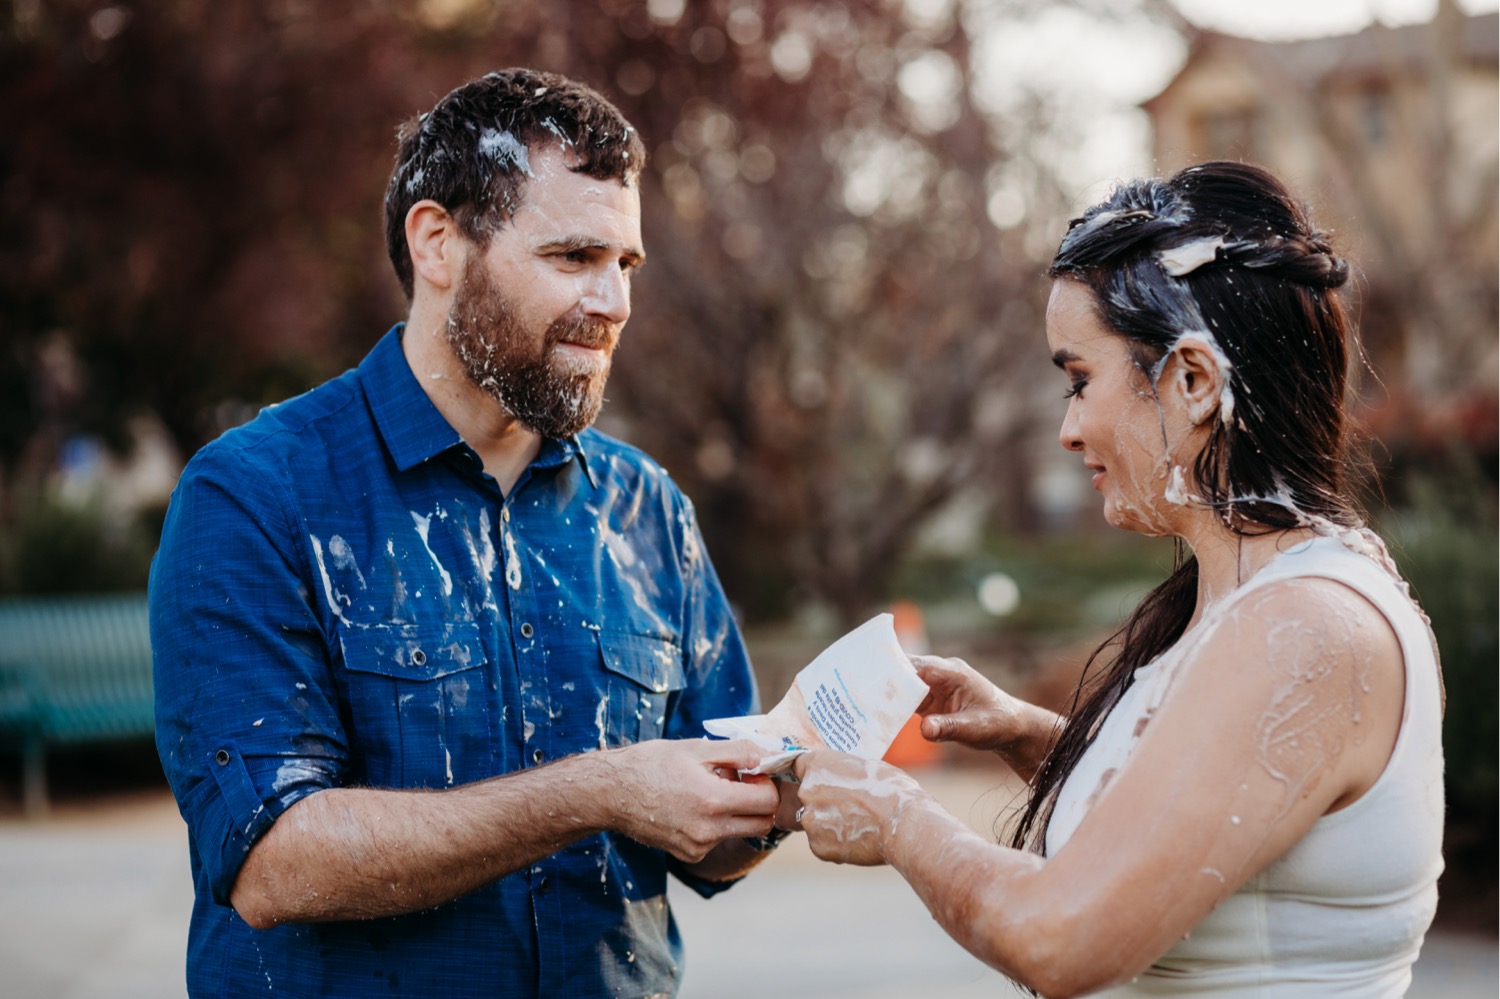 Couple cleans up with napkins after their engagement photo ice cream food fight.